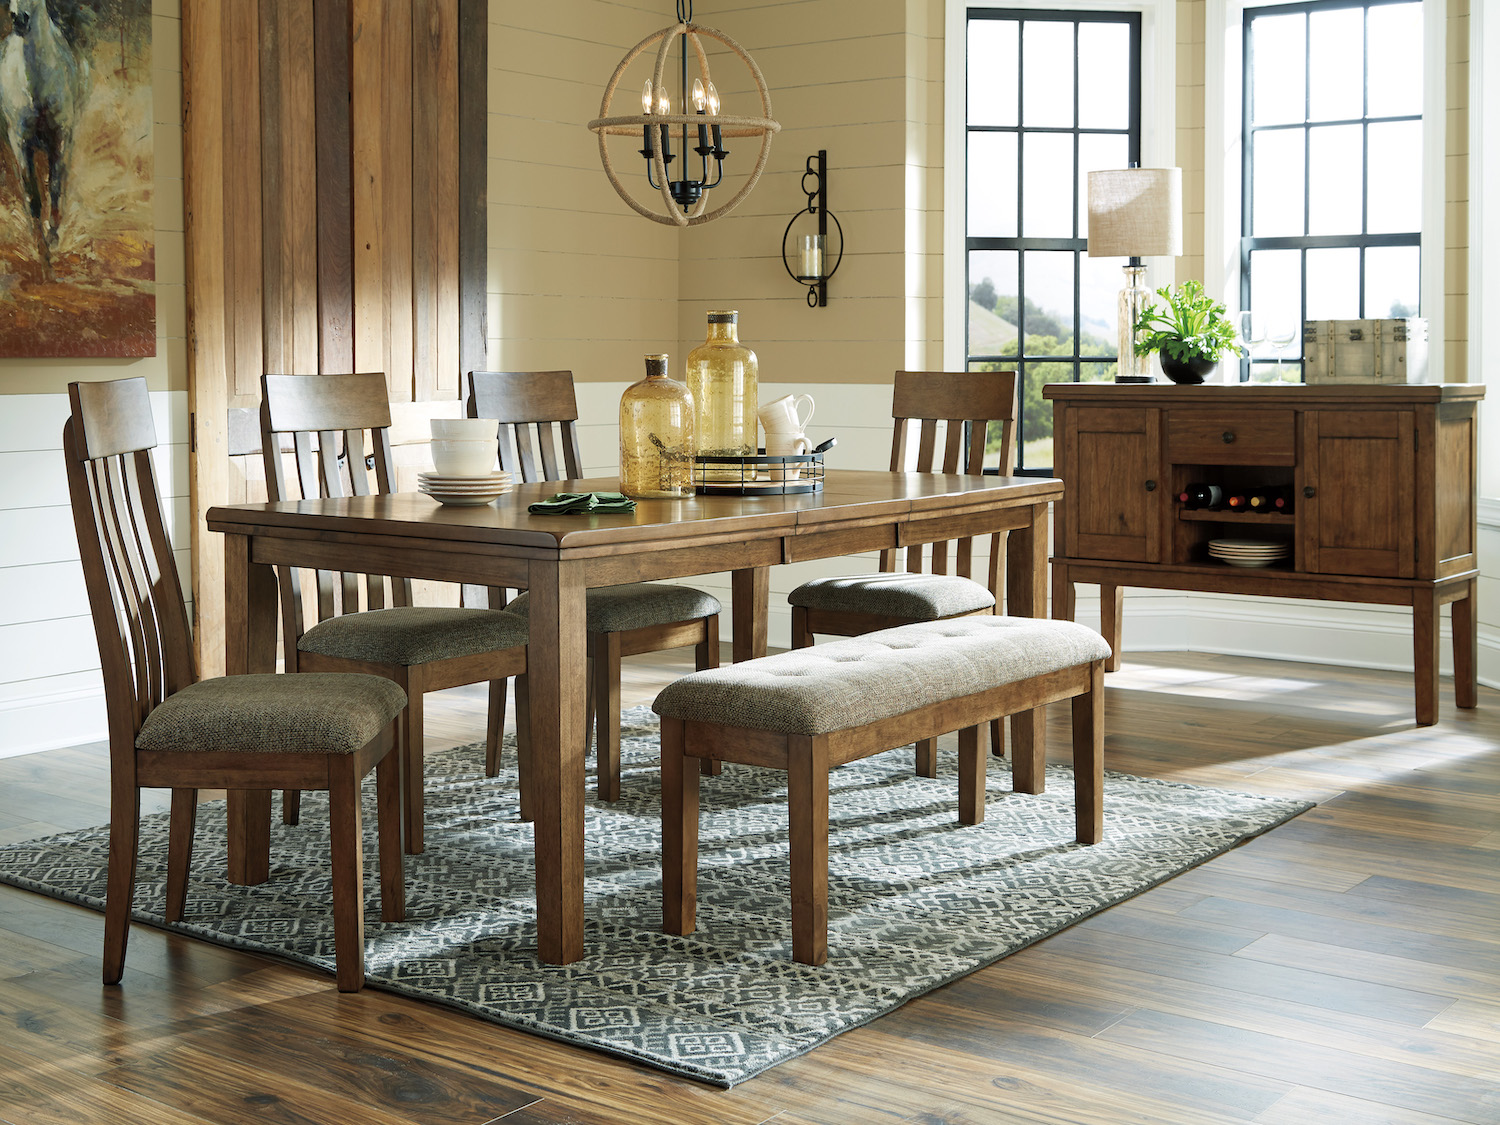 Ashley Casual Dining Room Set - Flaybern Dining Room Set up to 40% off